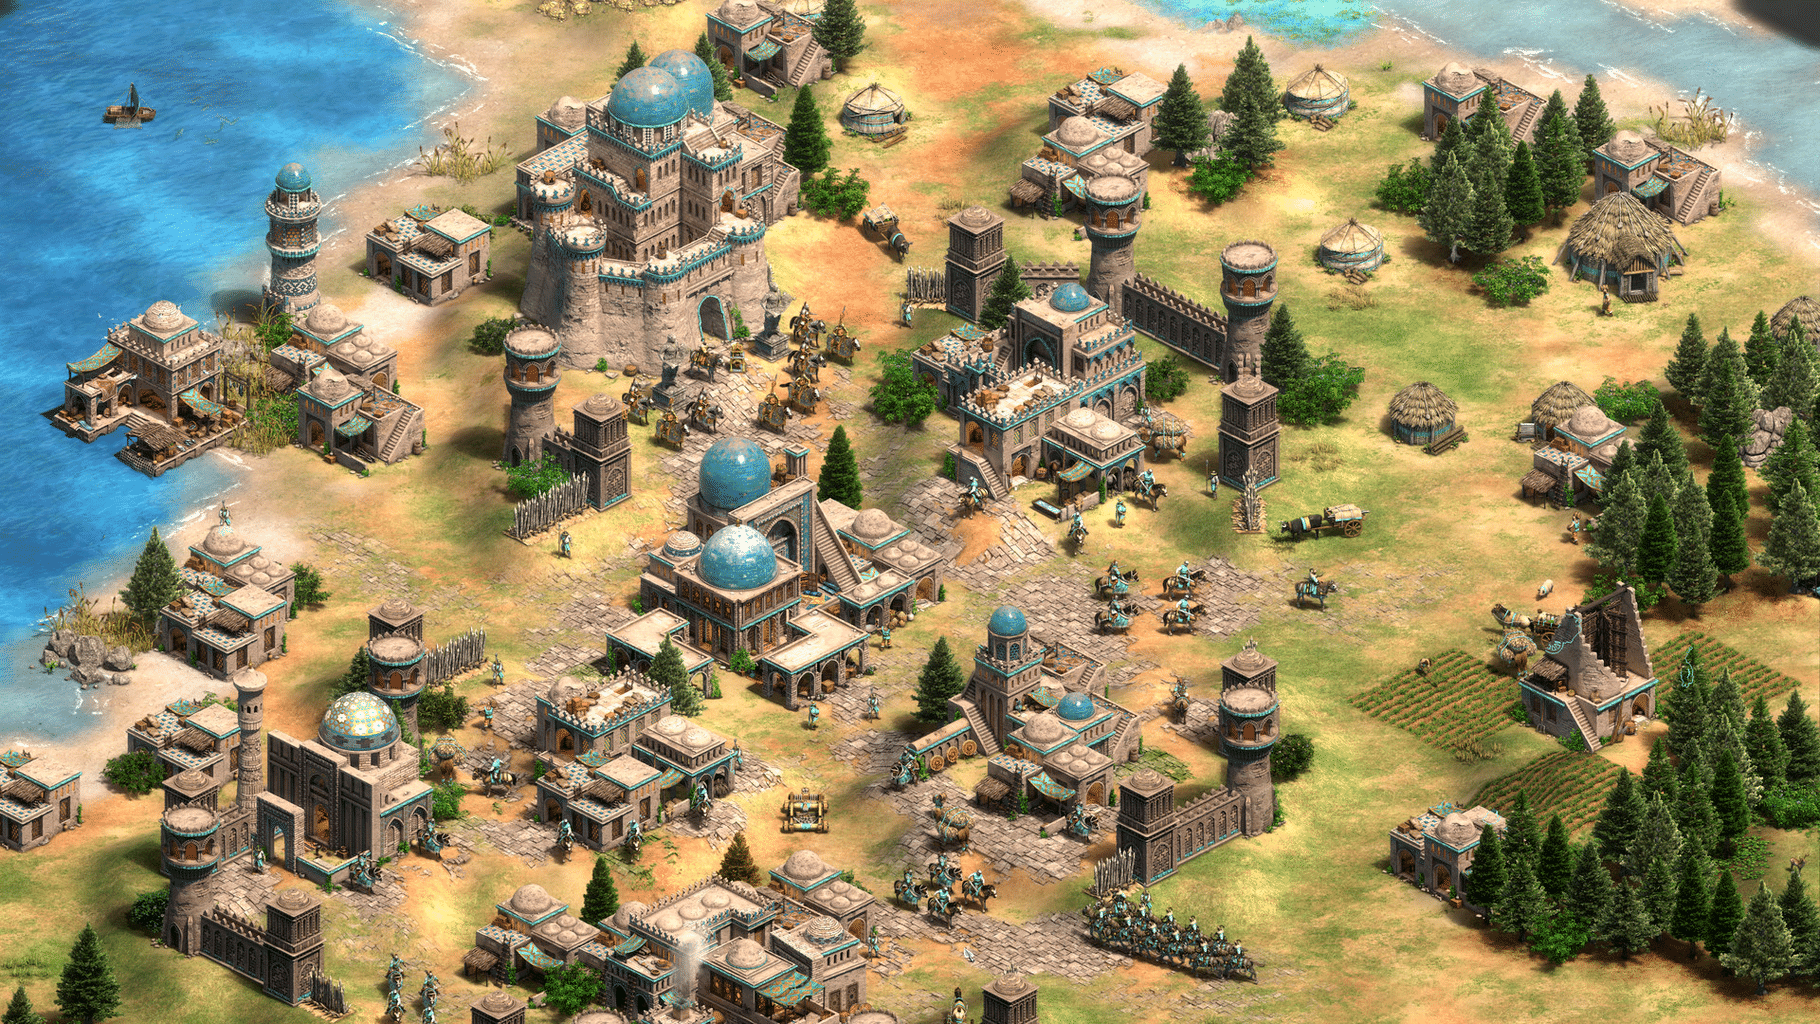 age of empires iii definitive edition pc requirements